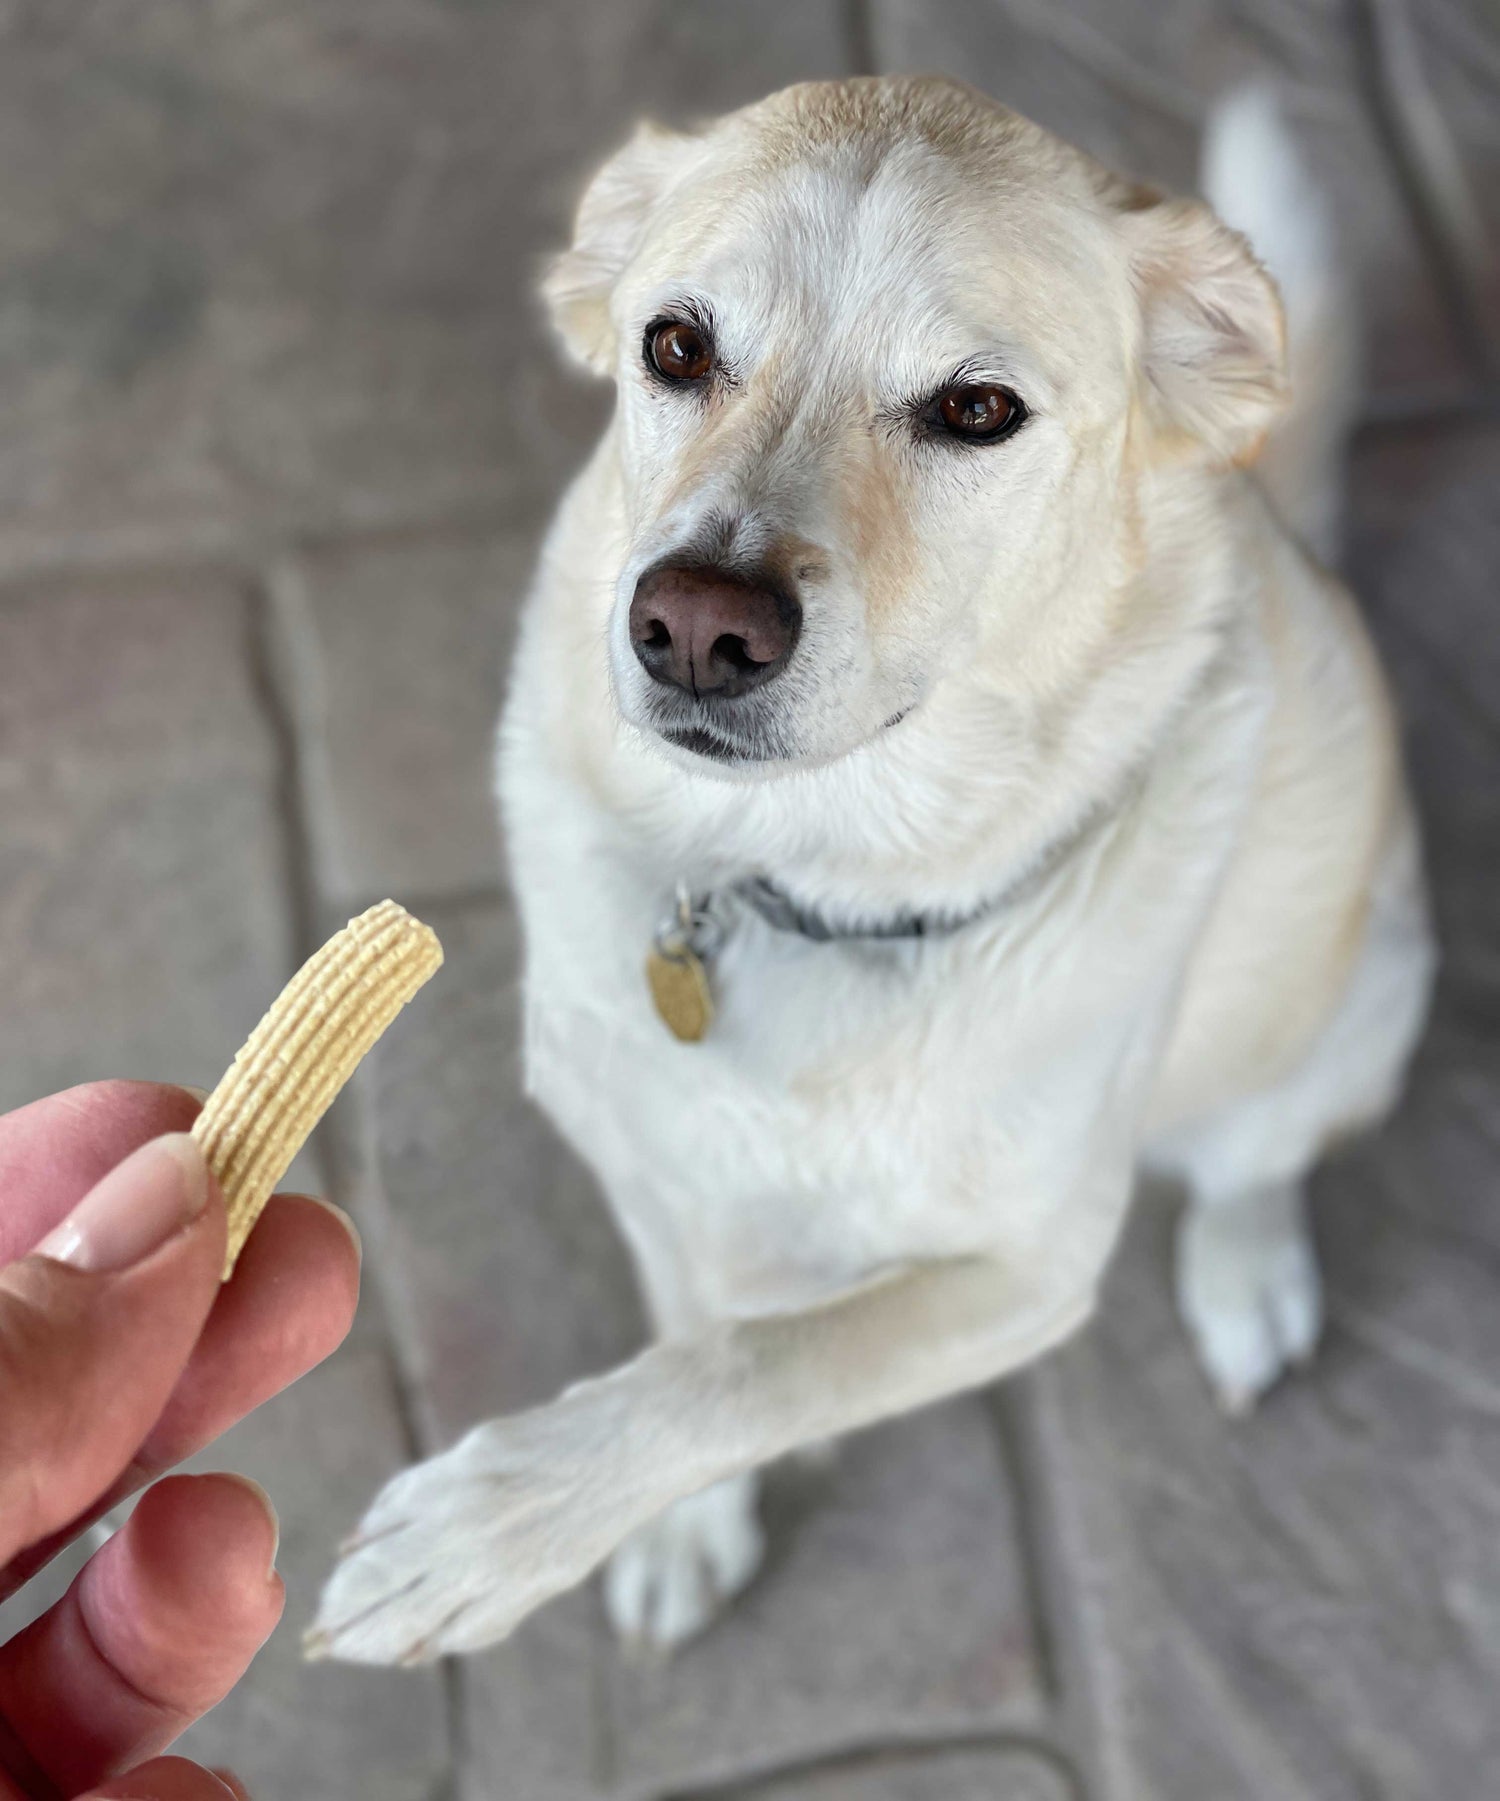 Bo is loving Pet Pasta as a nourishing, healthy treat and reward! Plus it is allergy-friendly!